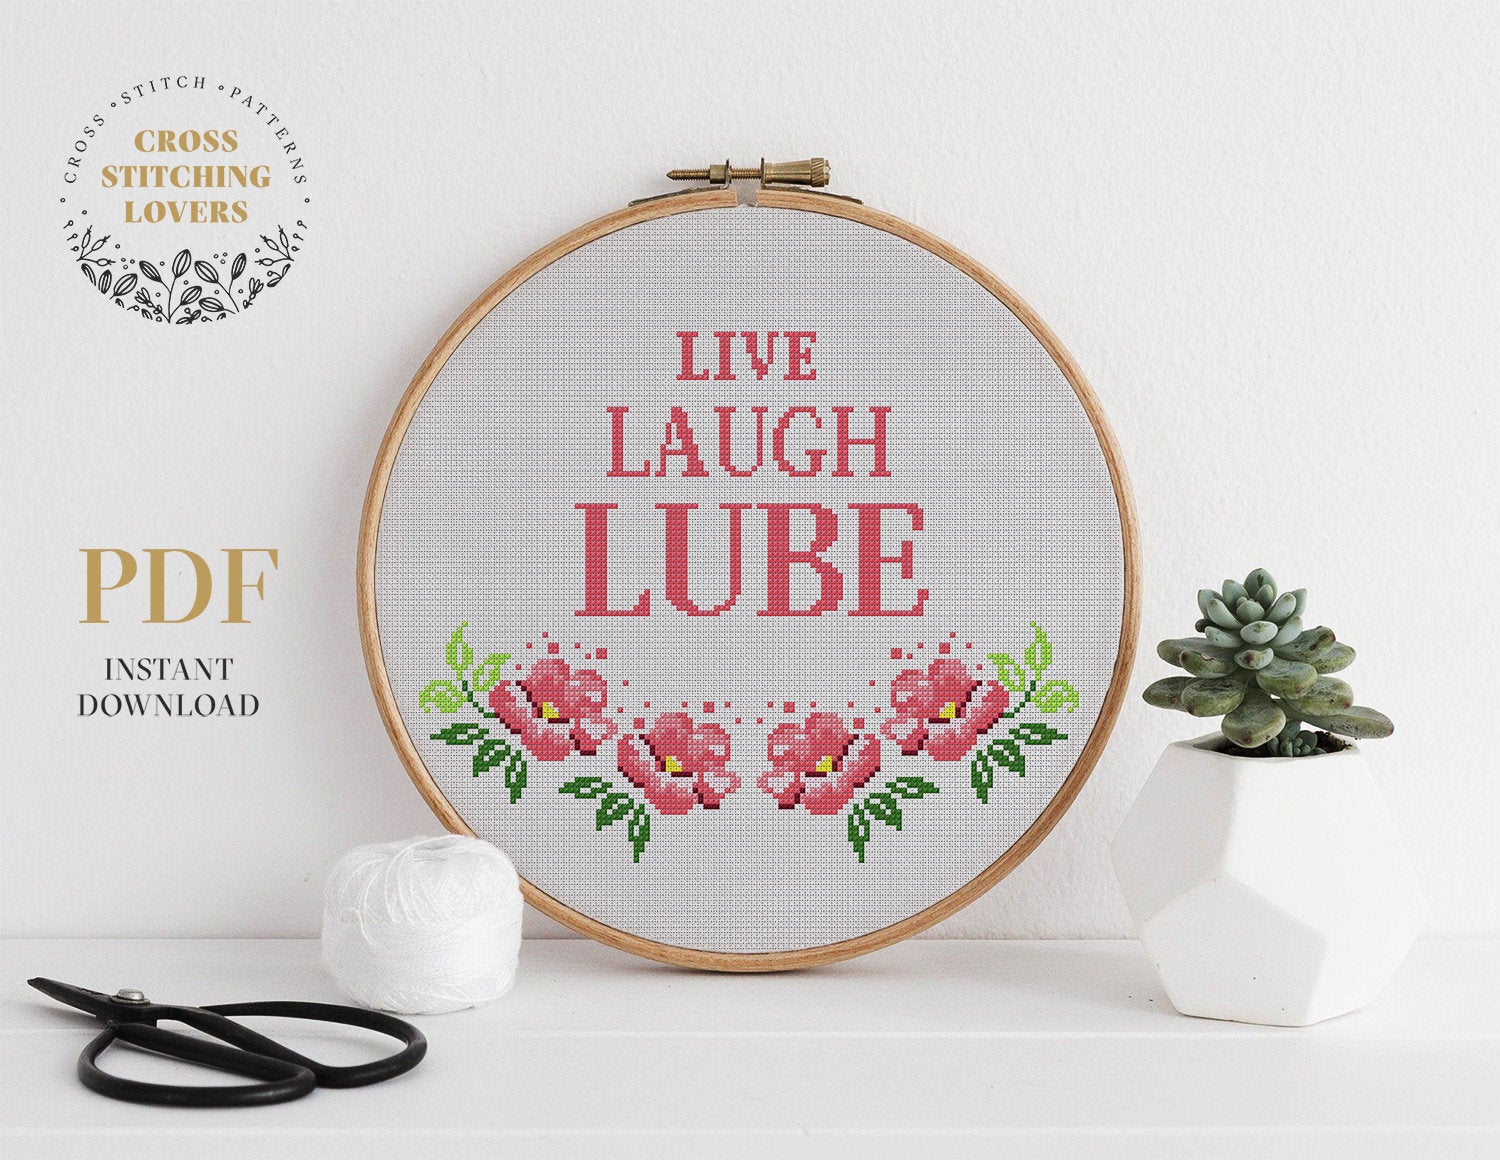 27 Cross-Stitch Patterns That'll Be As Fun To Display As They Are To Make